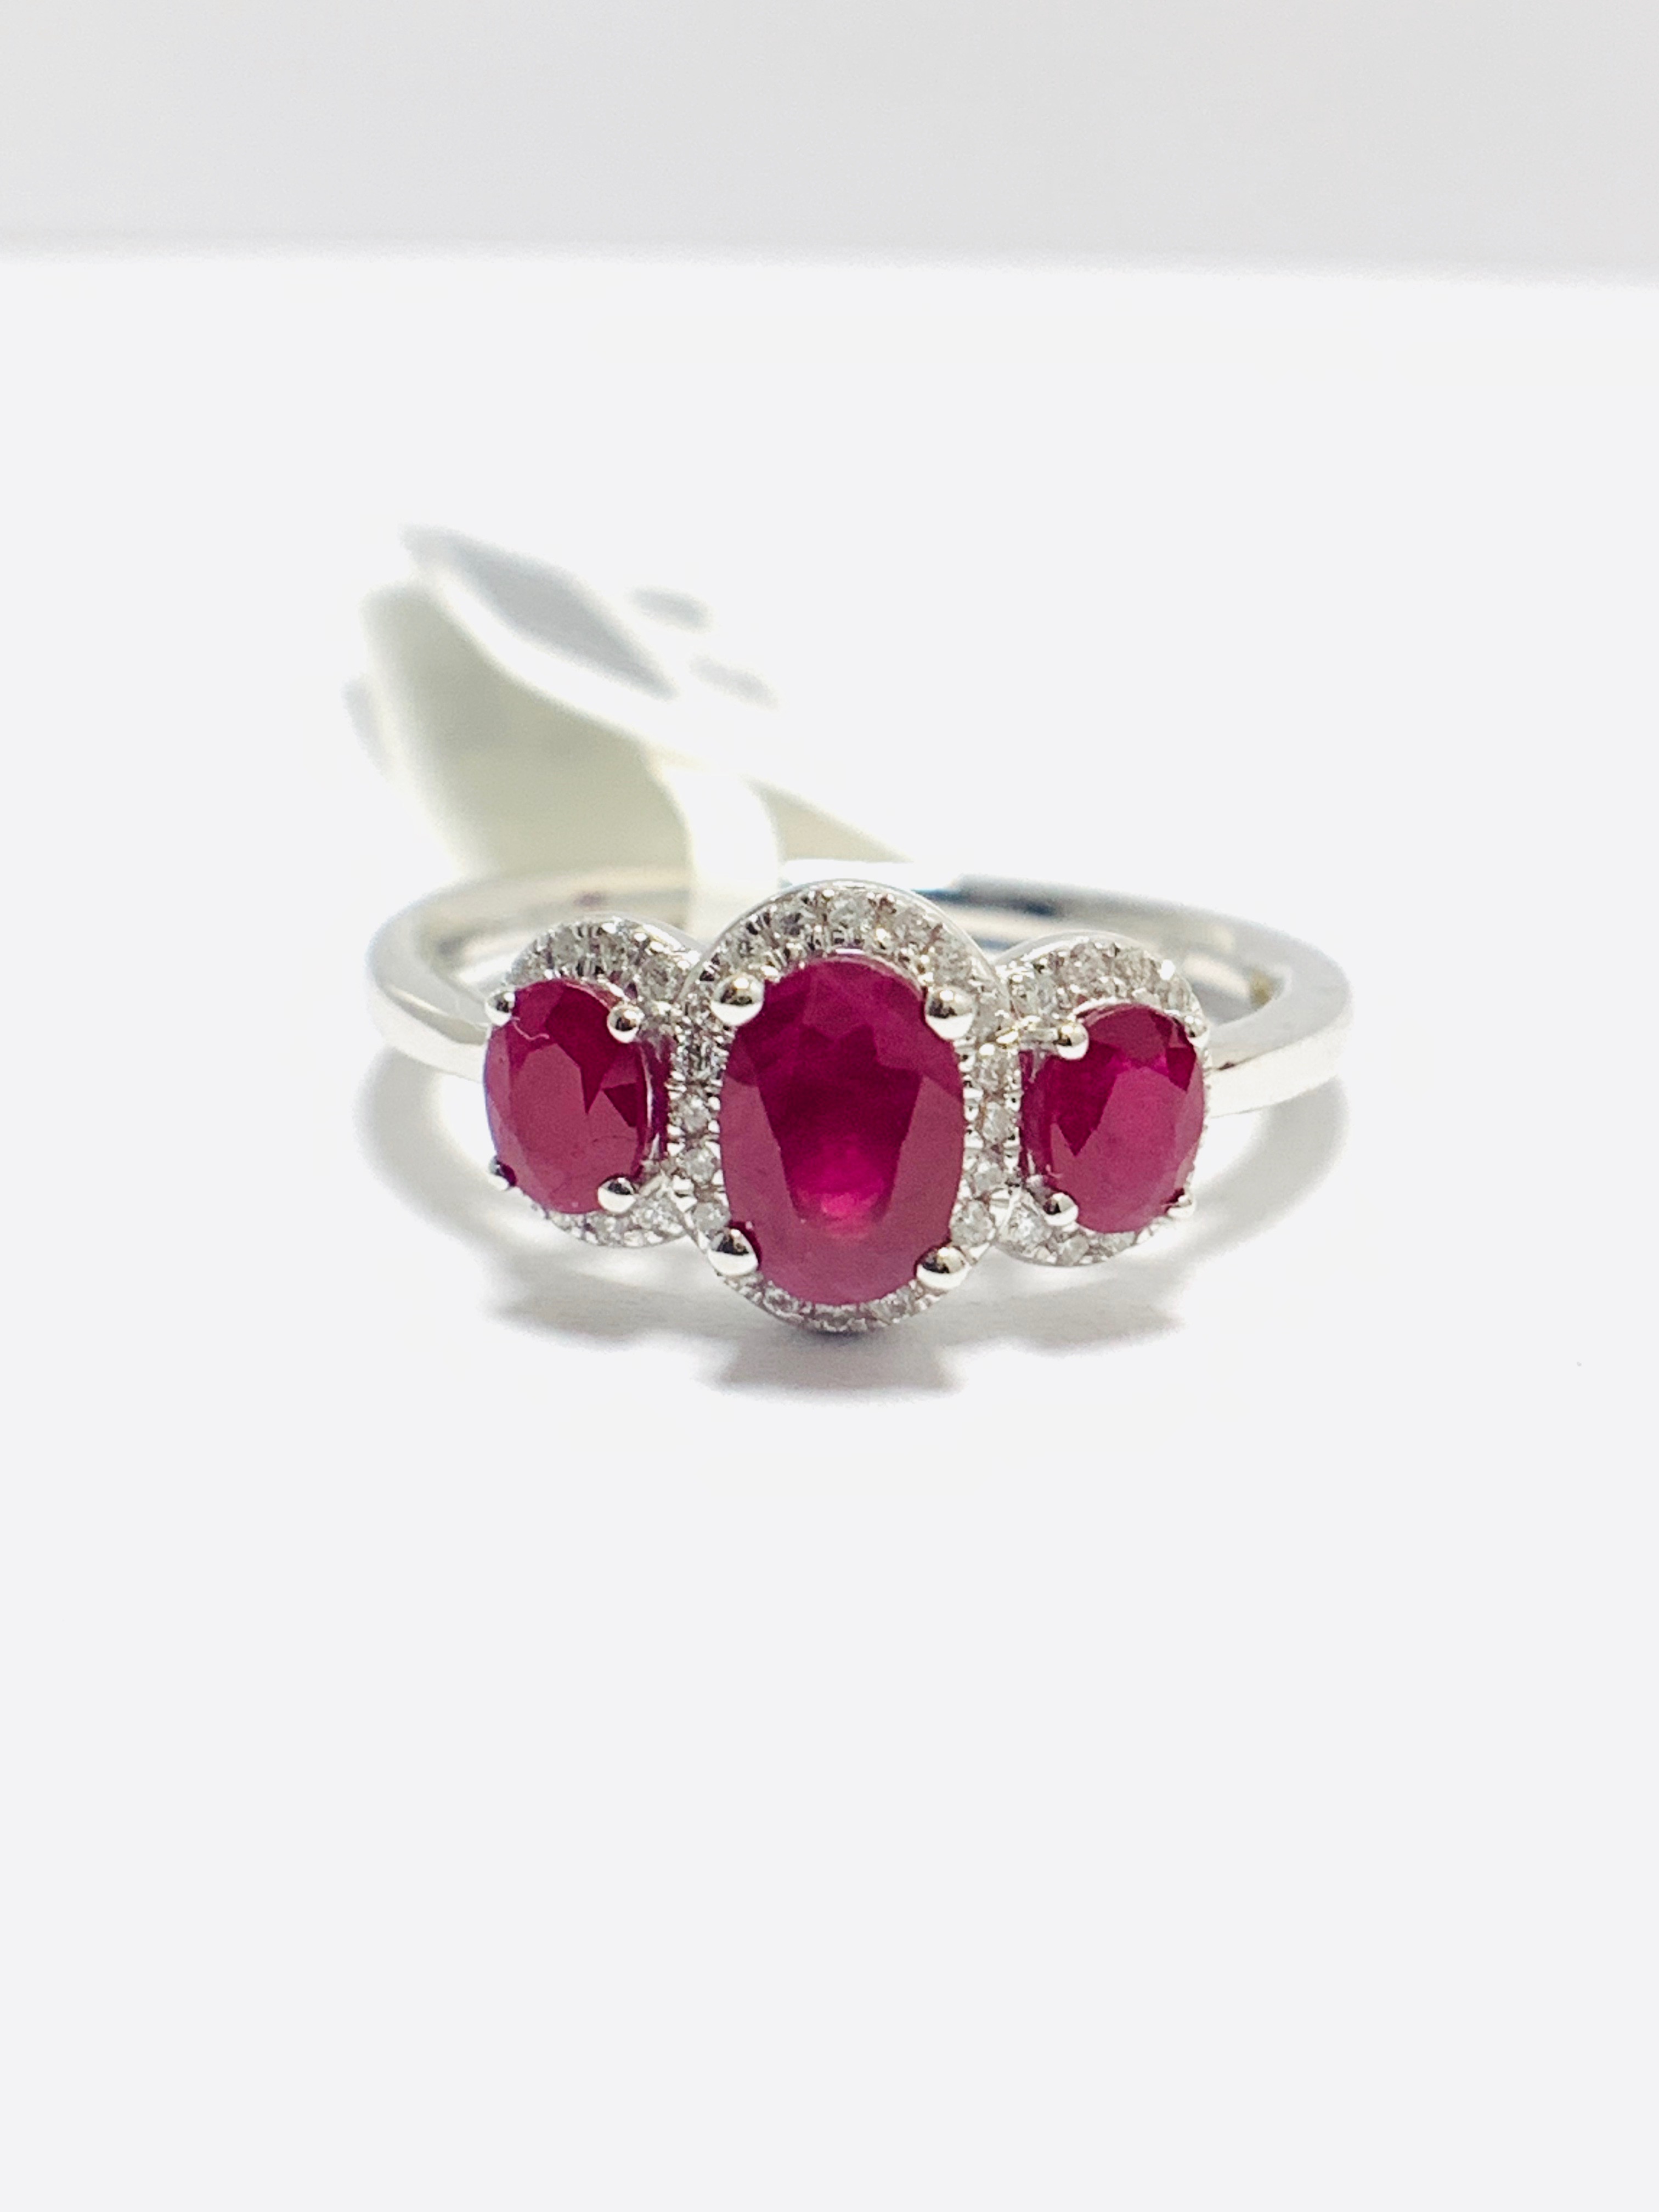 9ct white Gold Ruby trilogy style ring